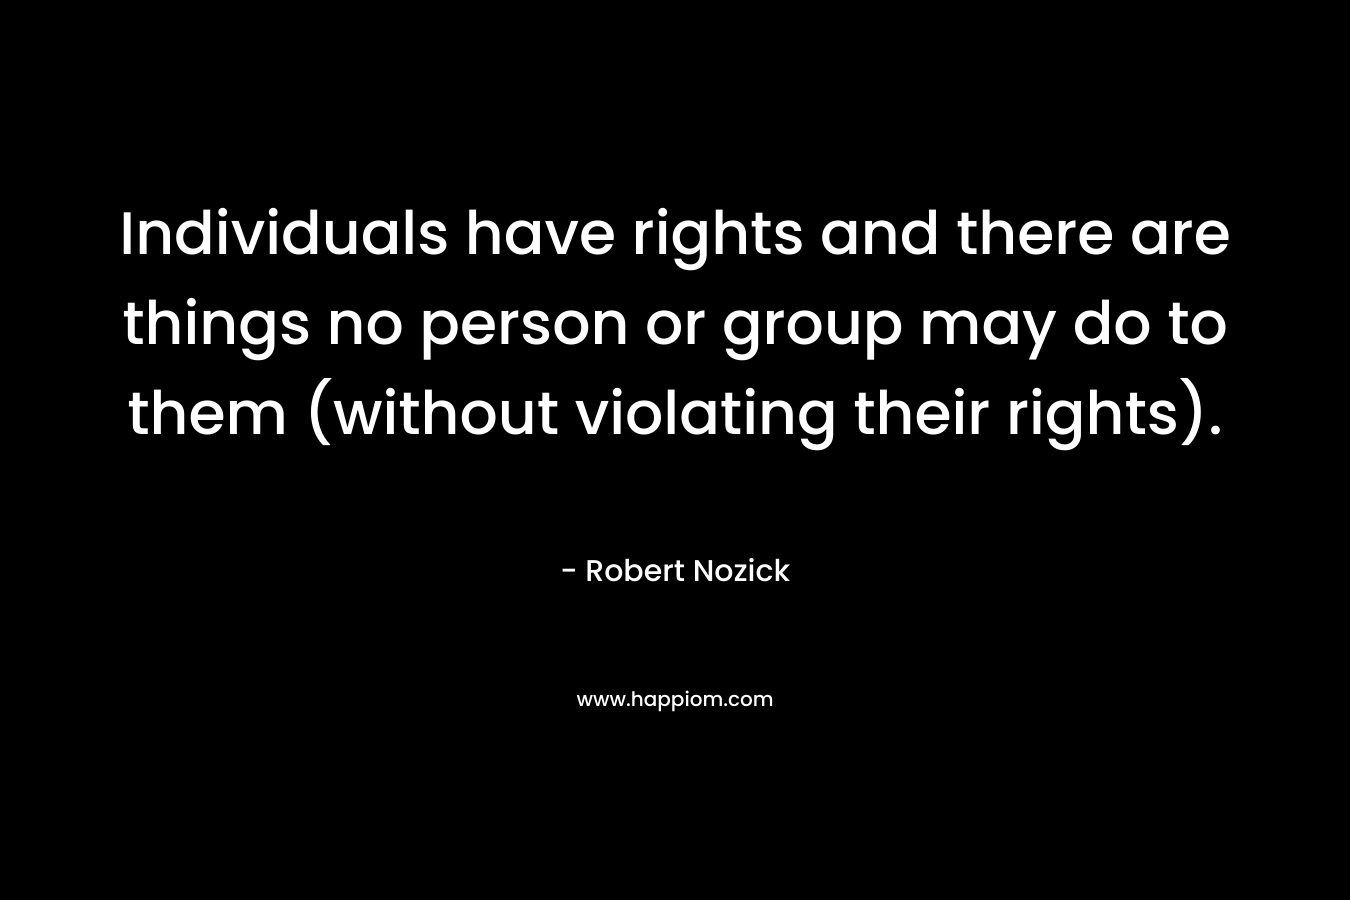 Individuals have rights and there are things no person or group may do to them (without violating their rights).